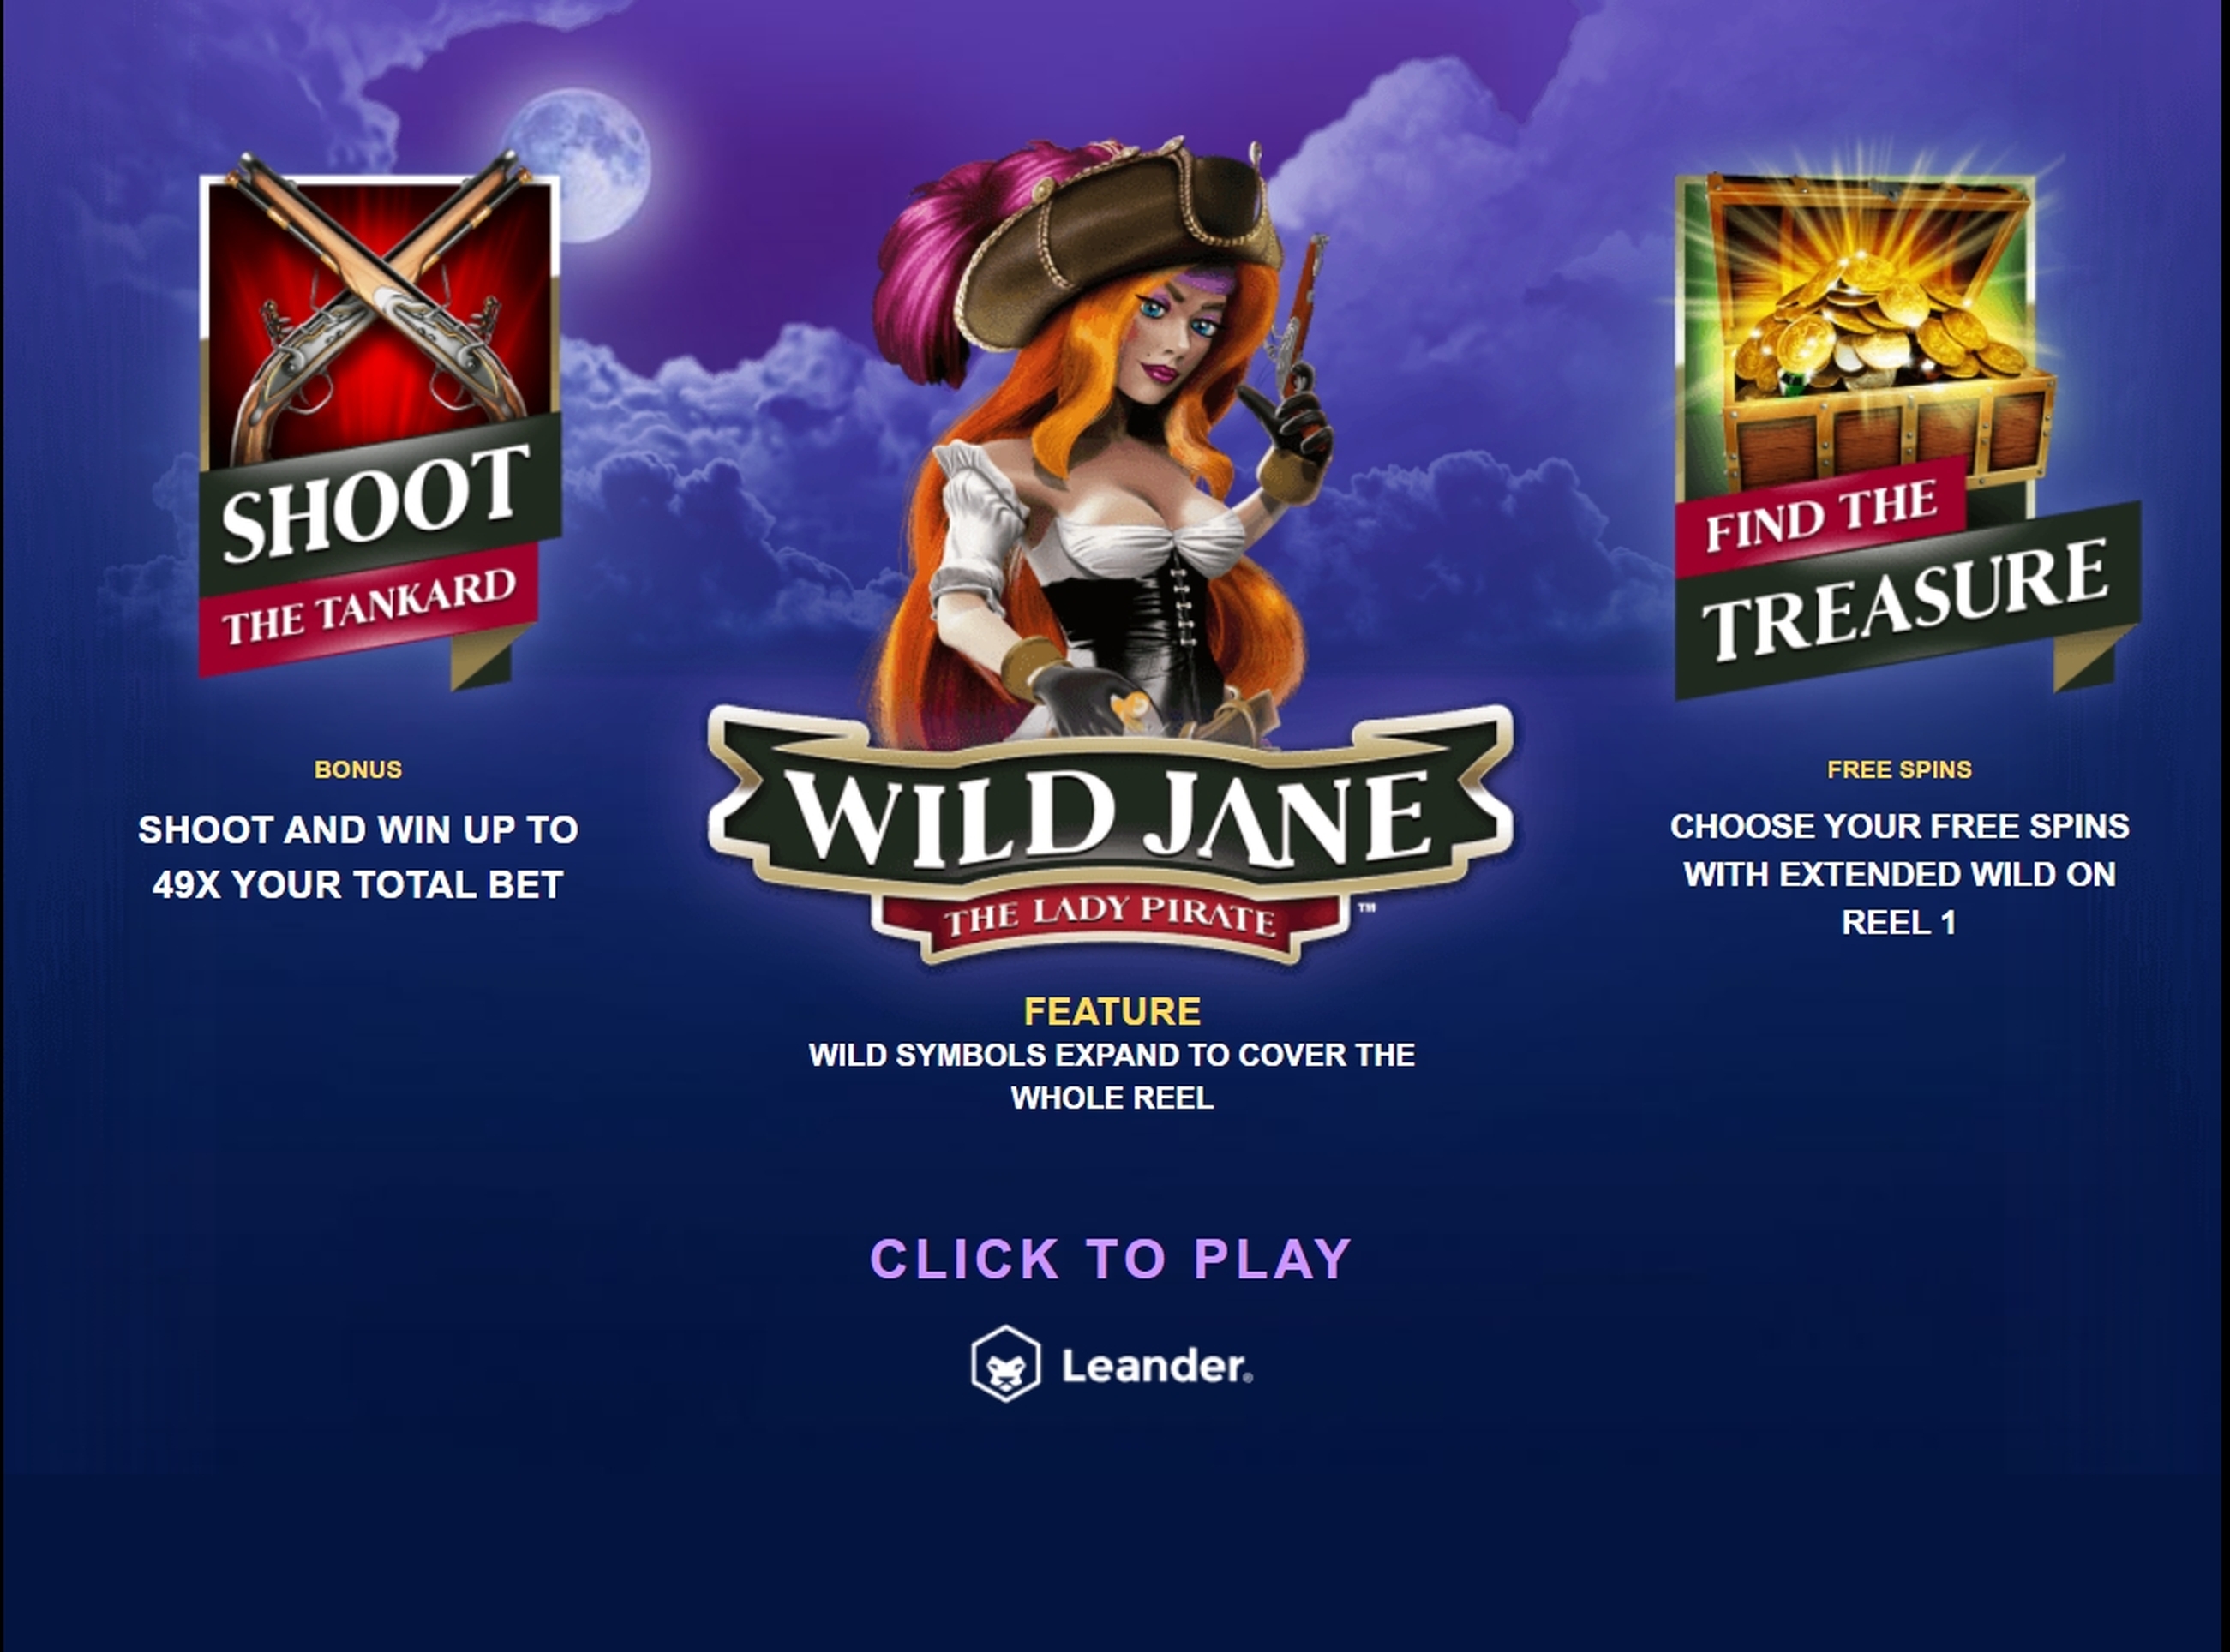 Play Wild Jane, the Lady Pirate Free Casino Slot Game by Leander Games